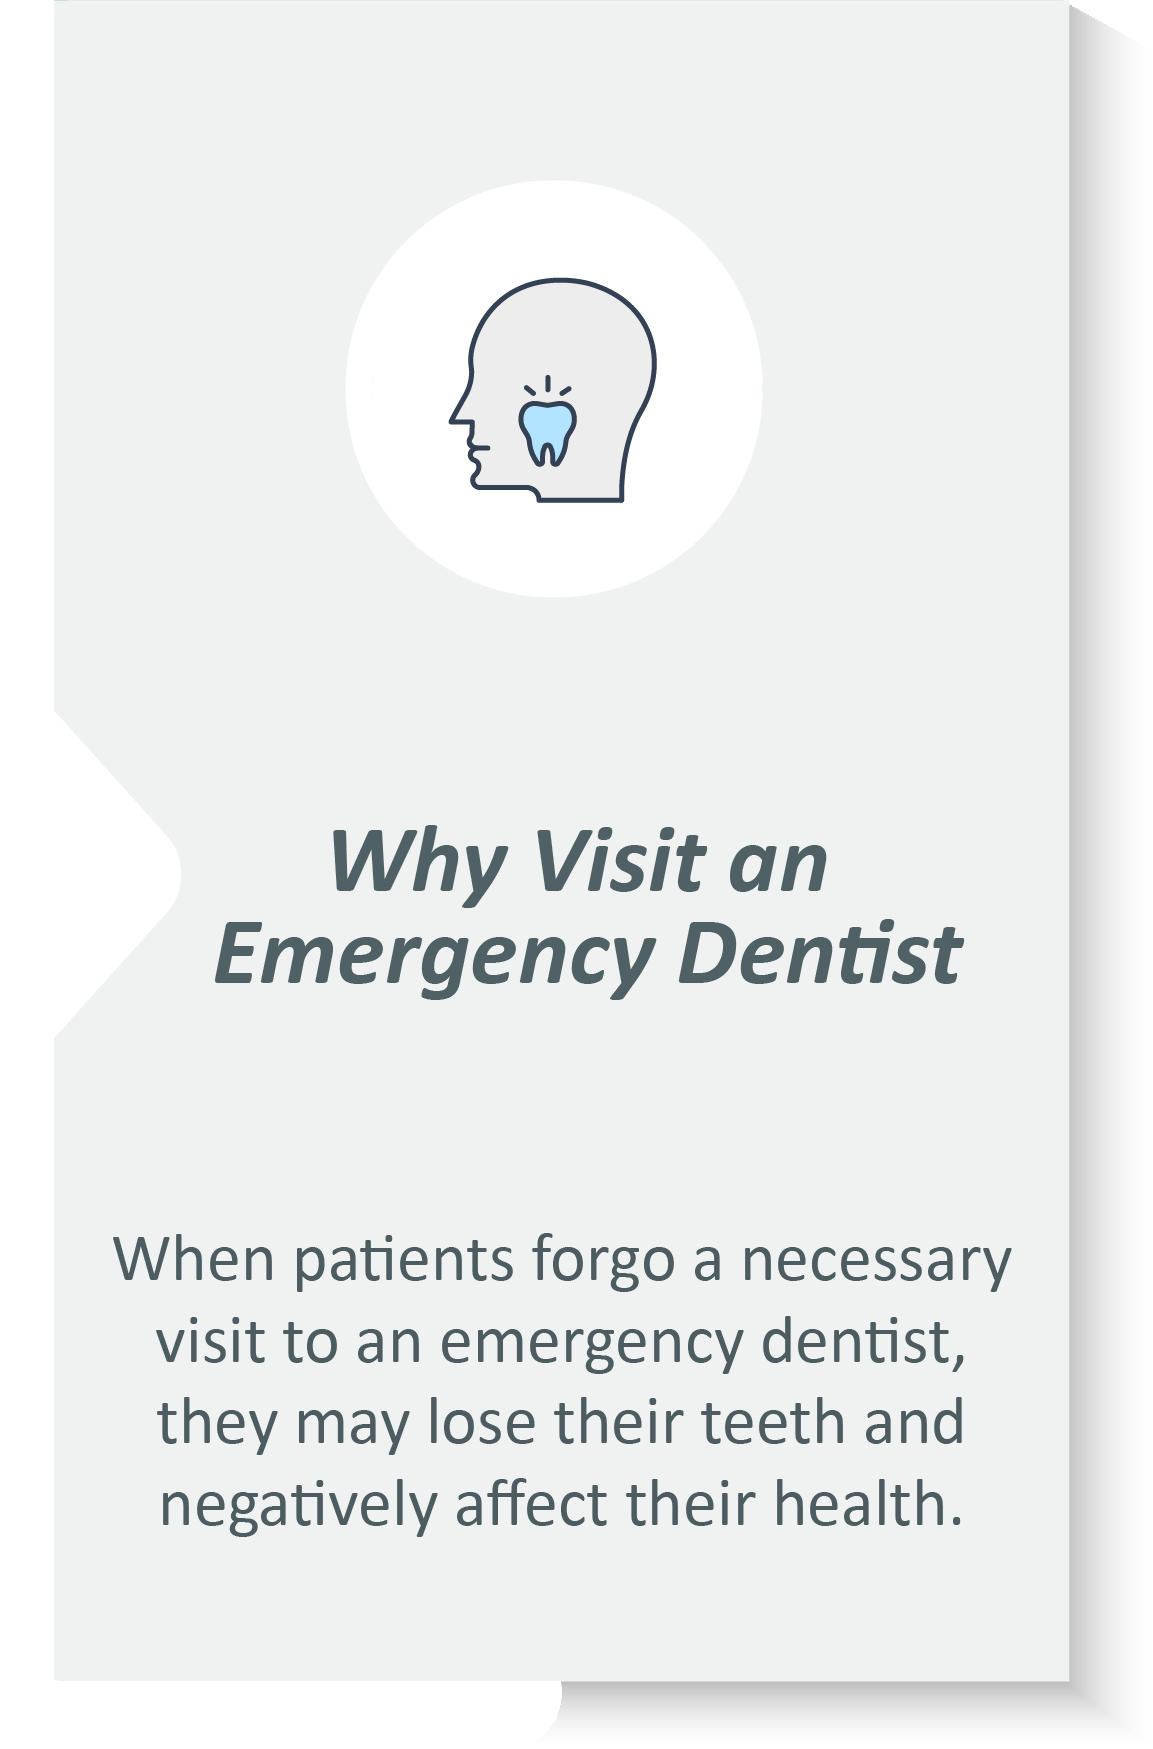 Emergency dentist infographic: When patients forgo a necessary visit to an emergency dentist, they may lose their teeth and negatively affect their health.